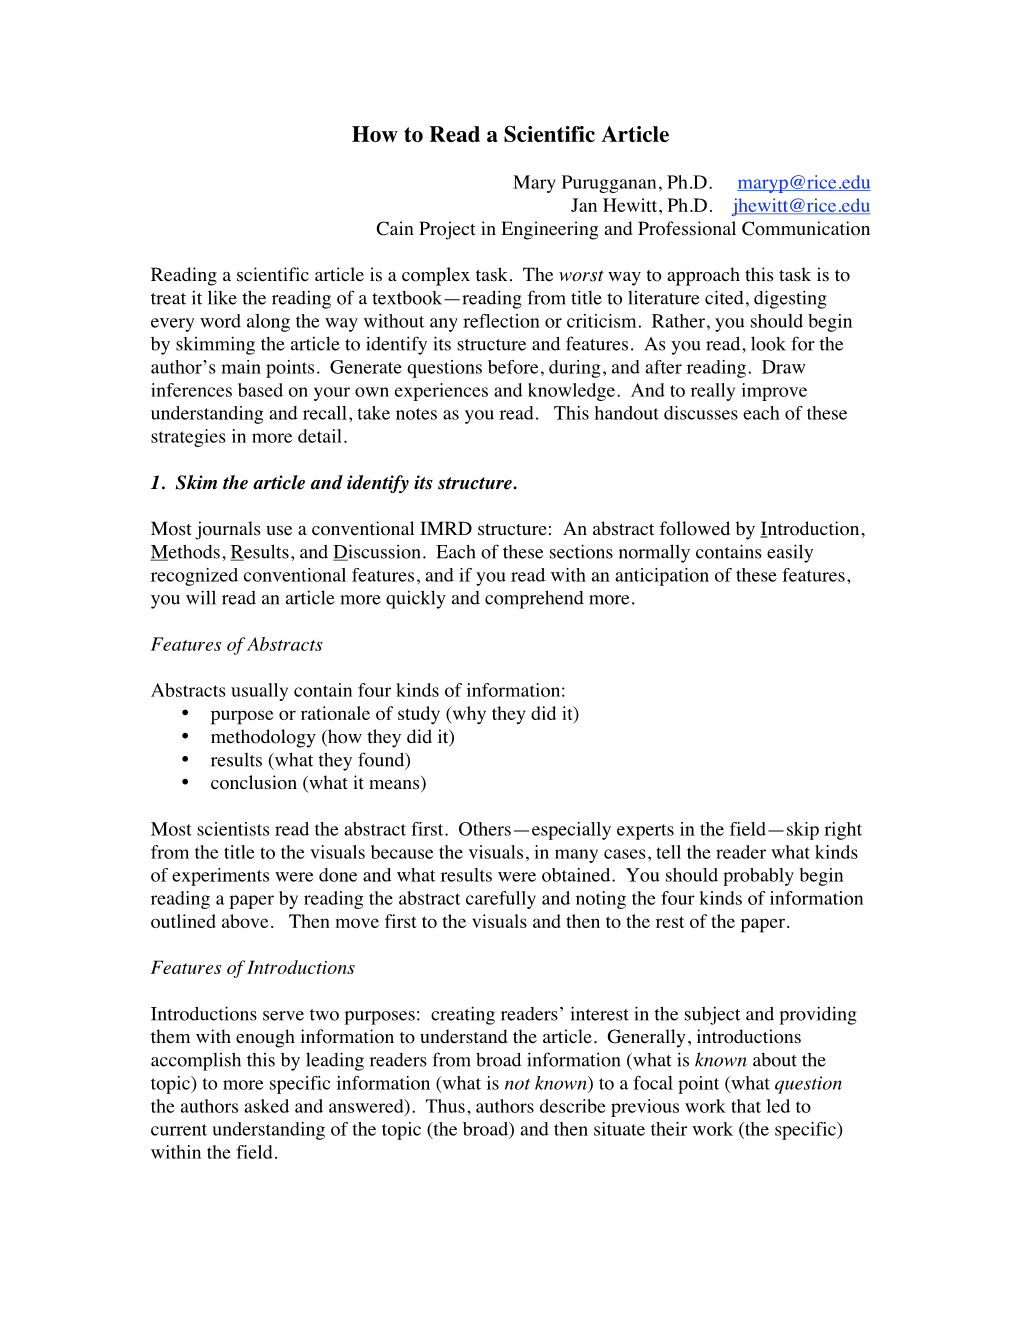 How to Read a Scientific Article -Cain Project in Engineering and Professional Communication